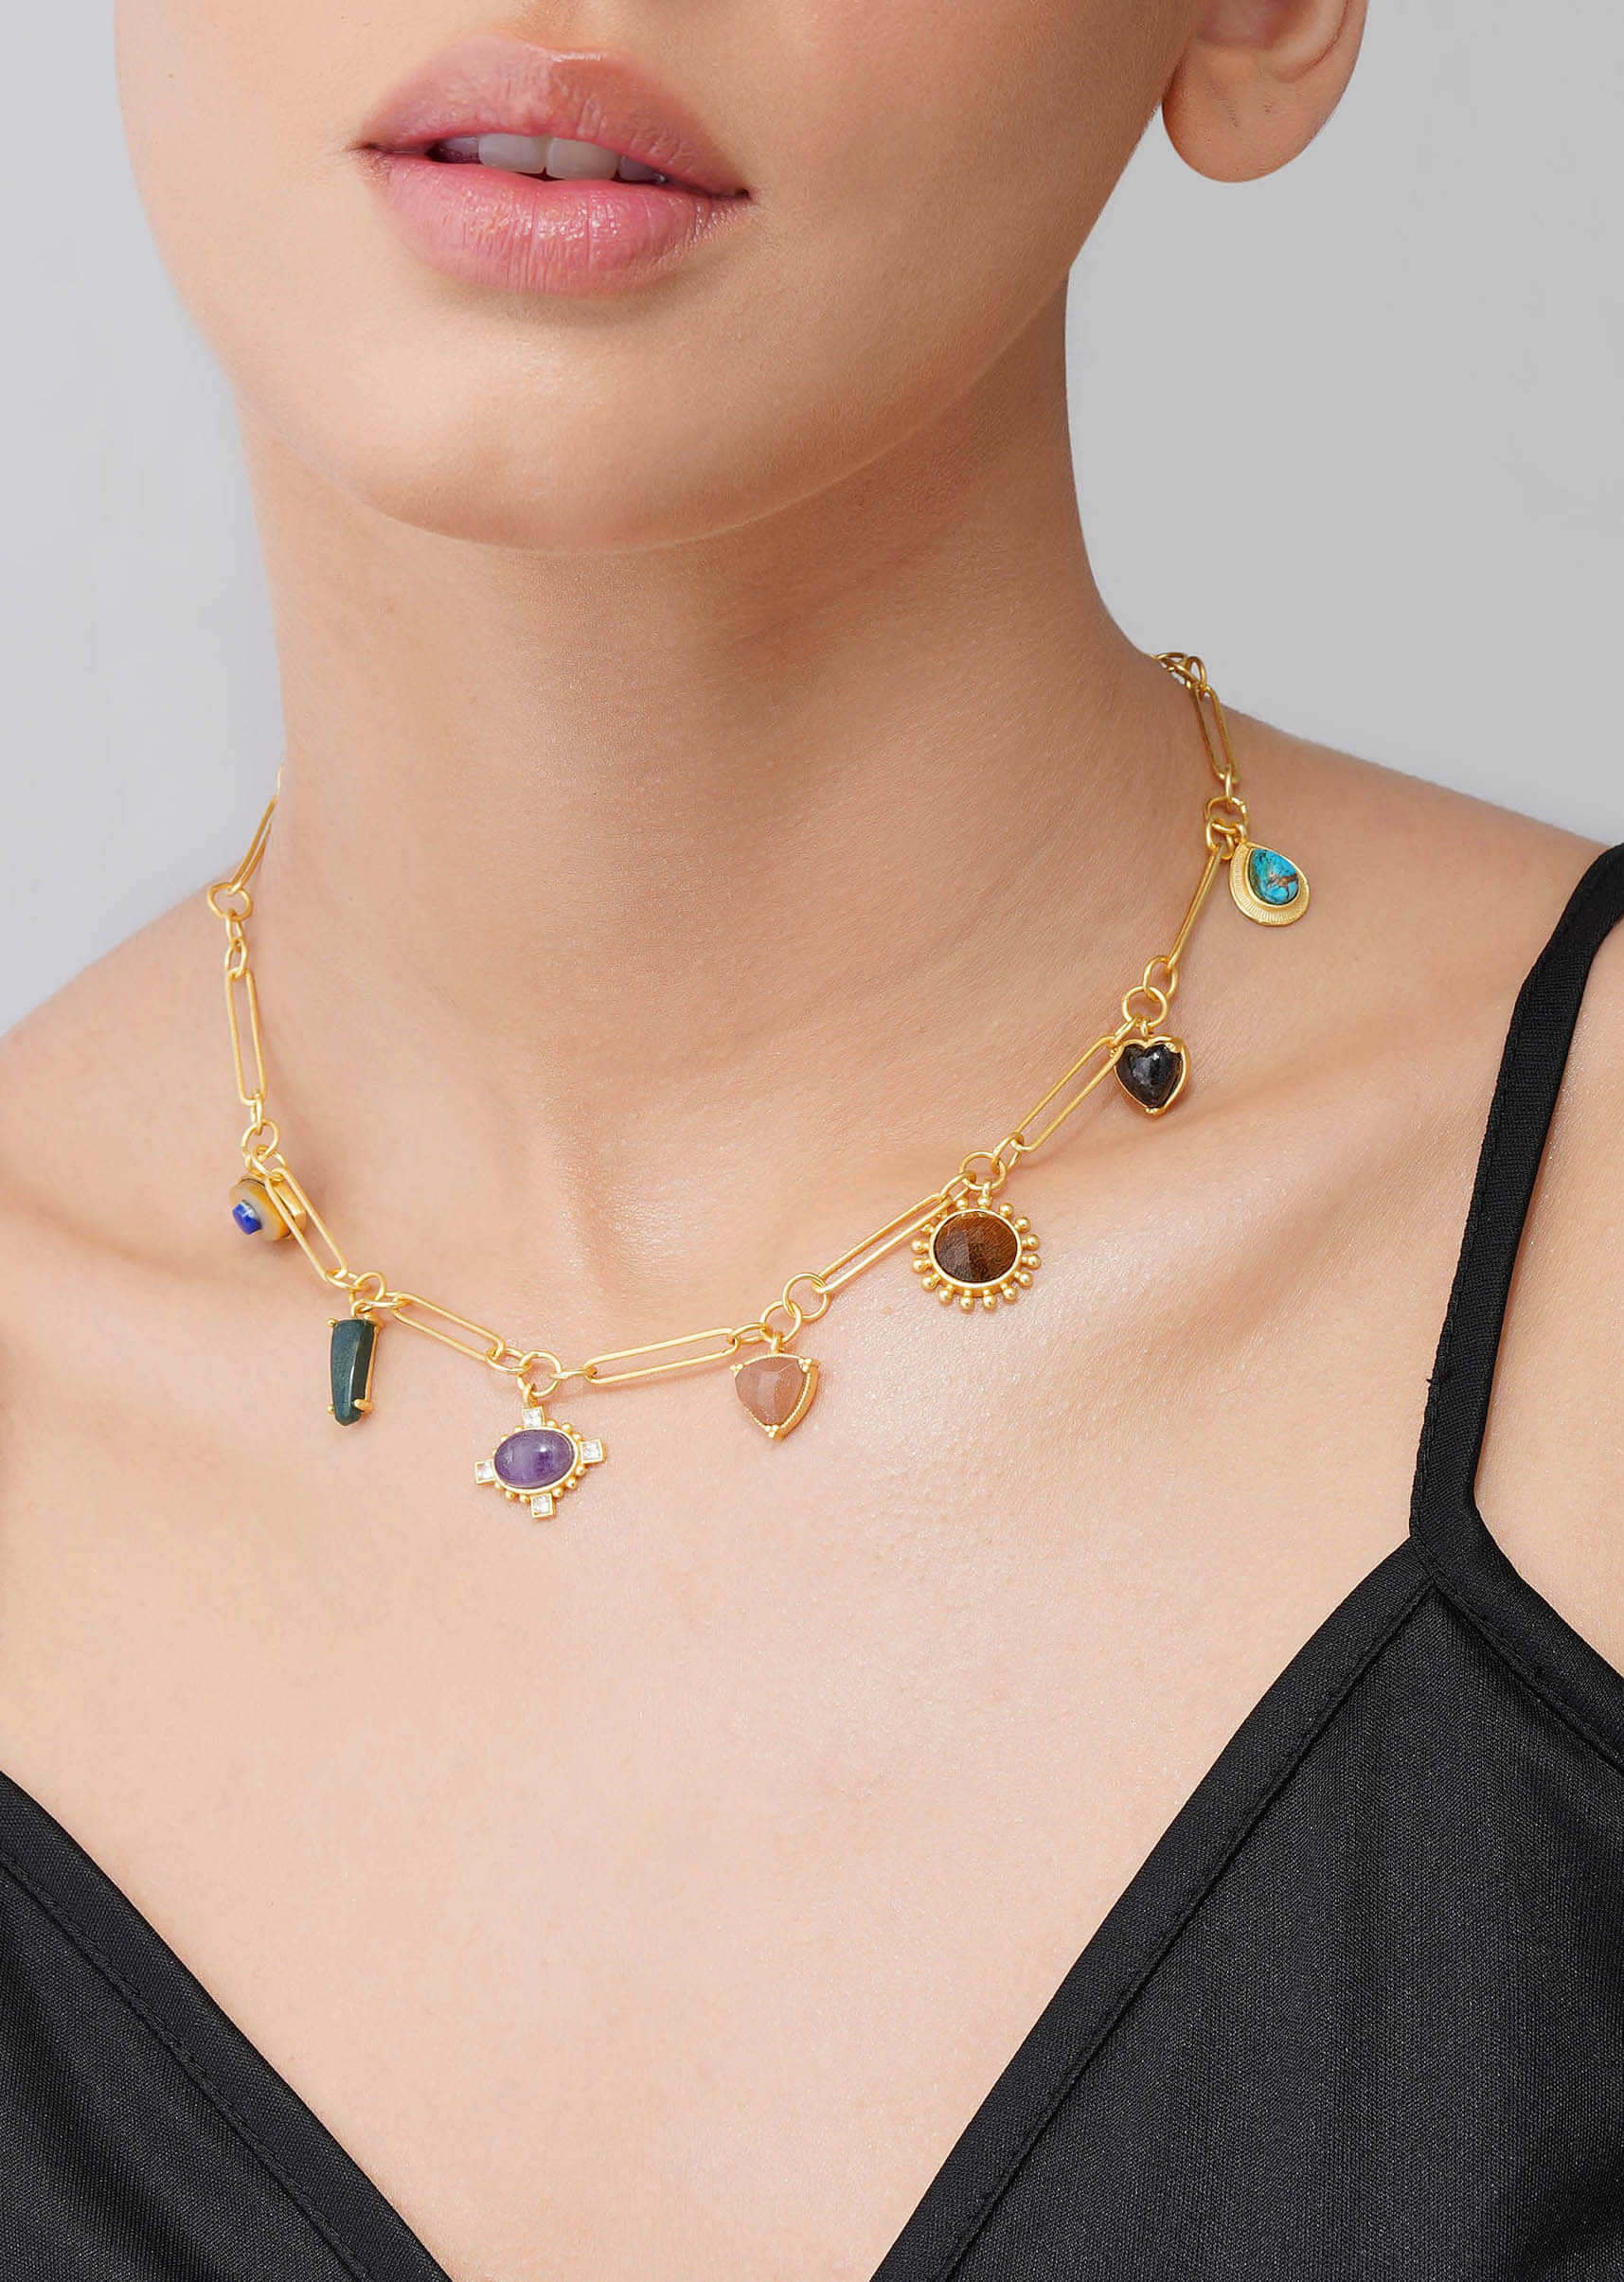 22Kt Gold Plated Necklace With Healing Stone Pendants In Round Fall